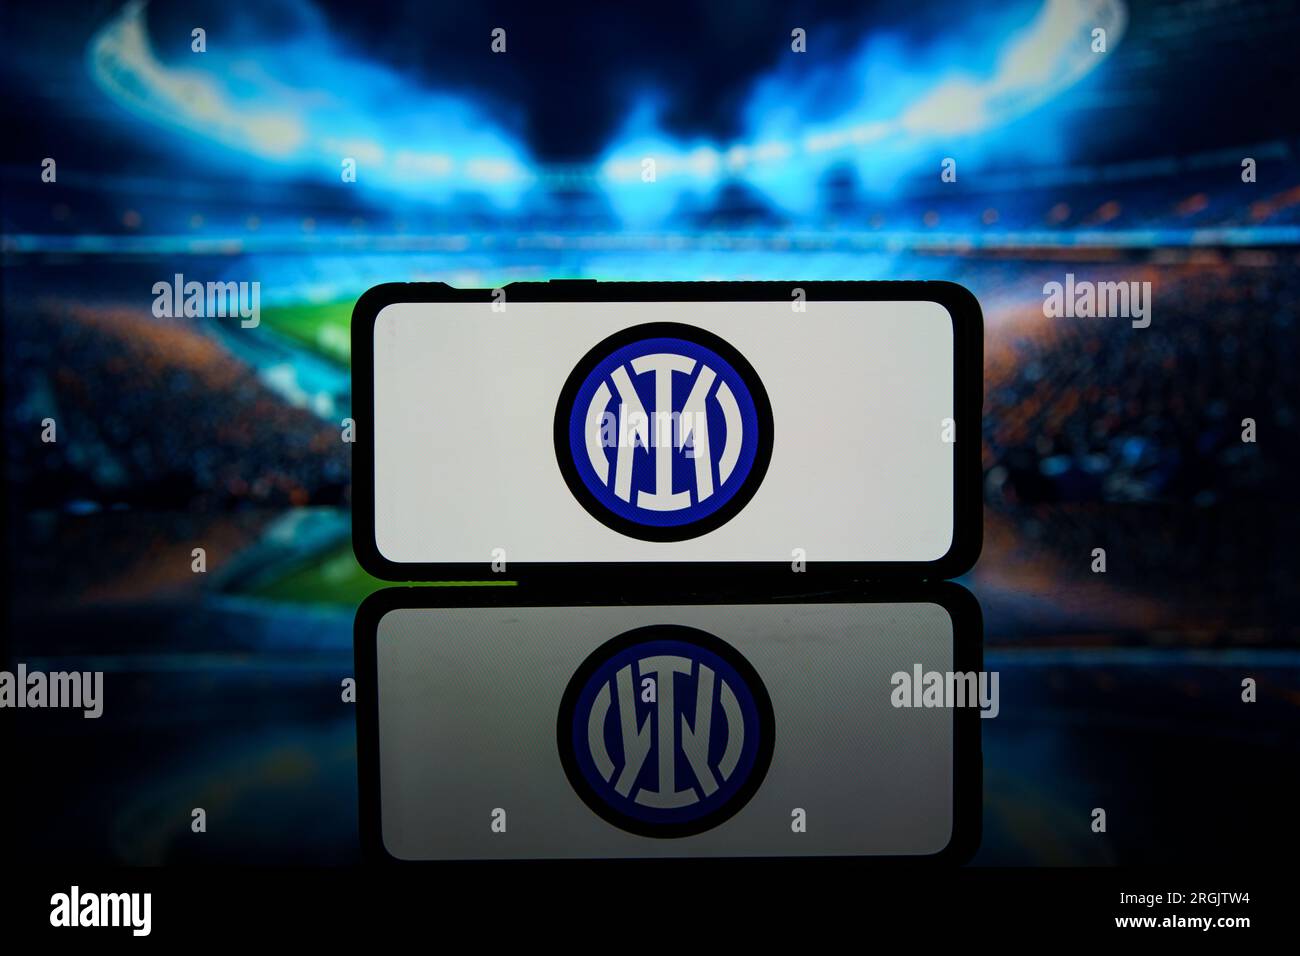 INTER Wallpapers